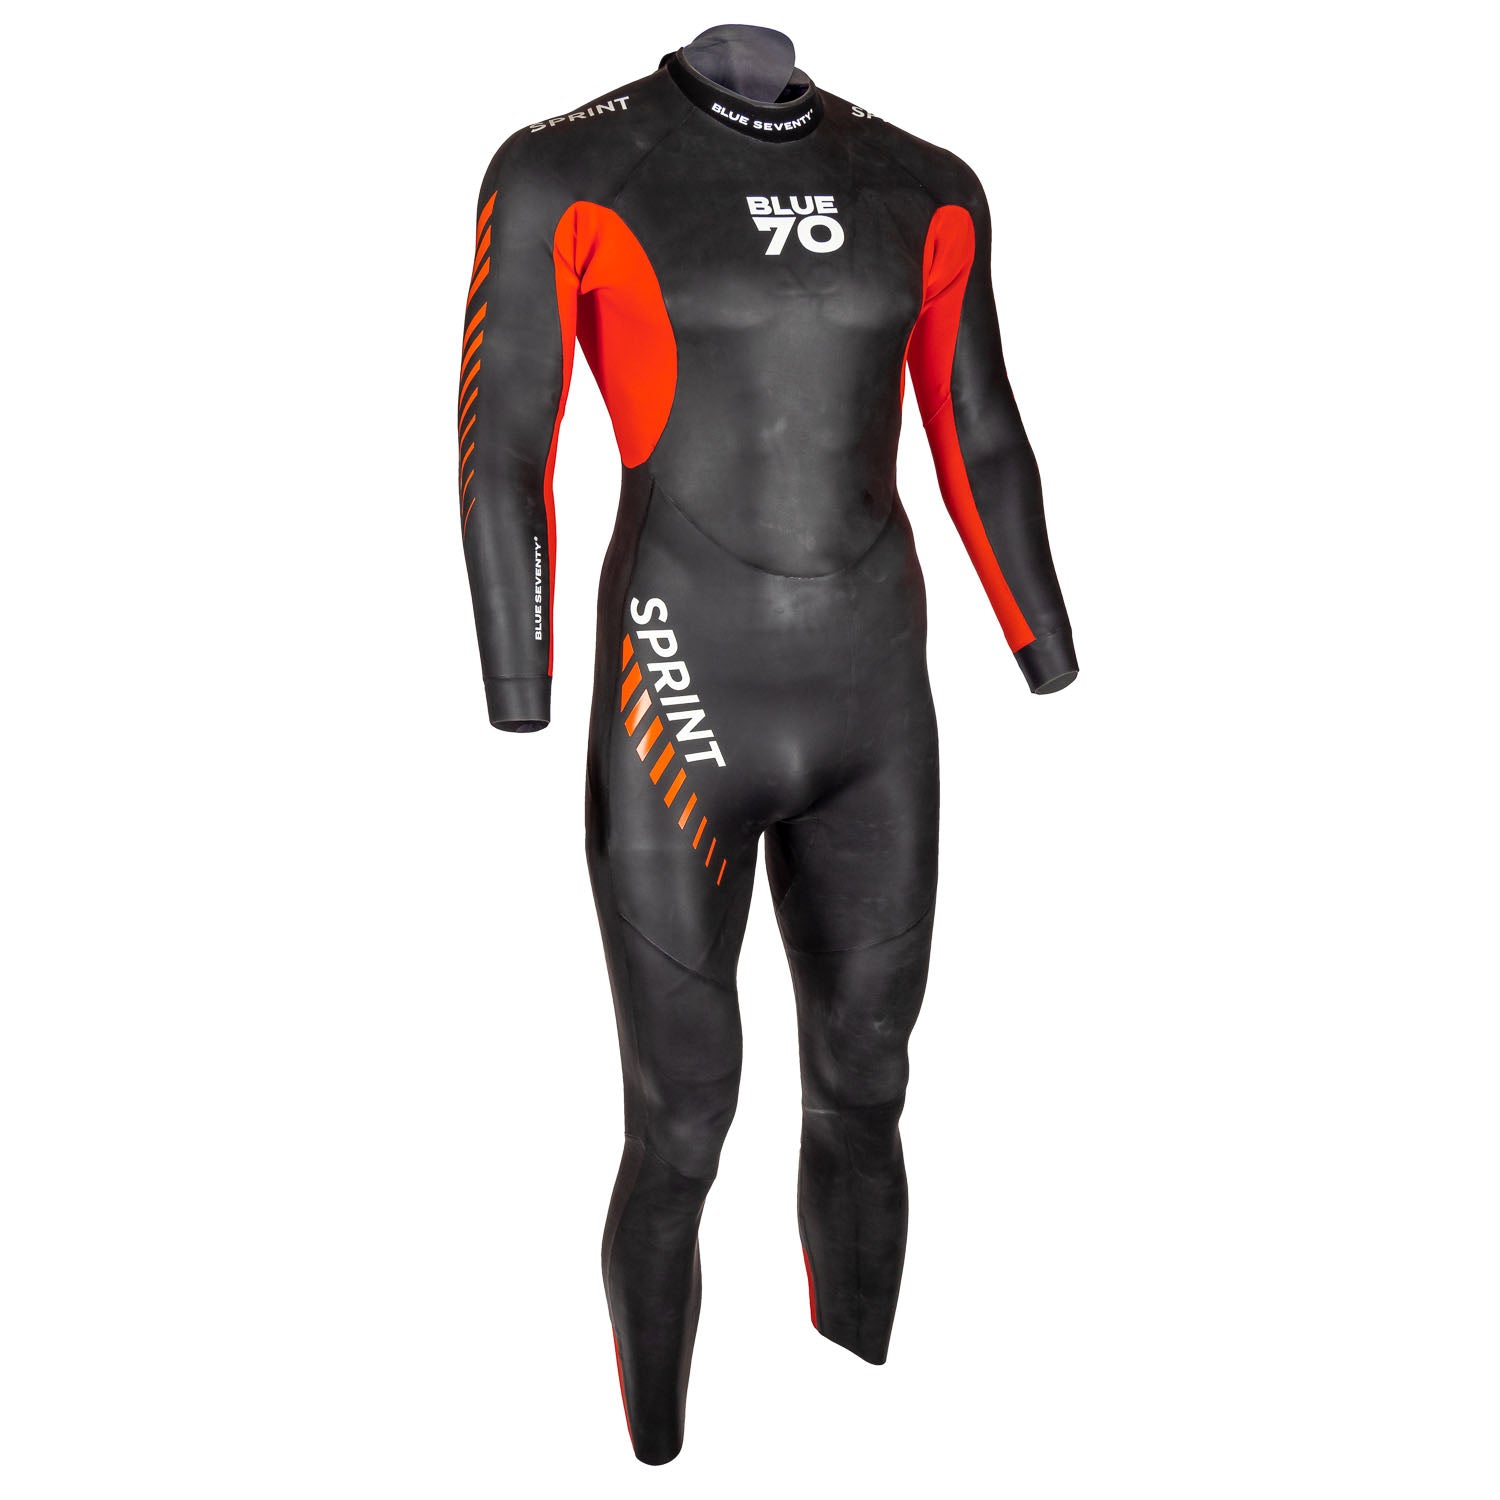 Ultra-thin WetSuit Full Body Super stretch Diving Suit Swim Surf